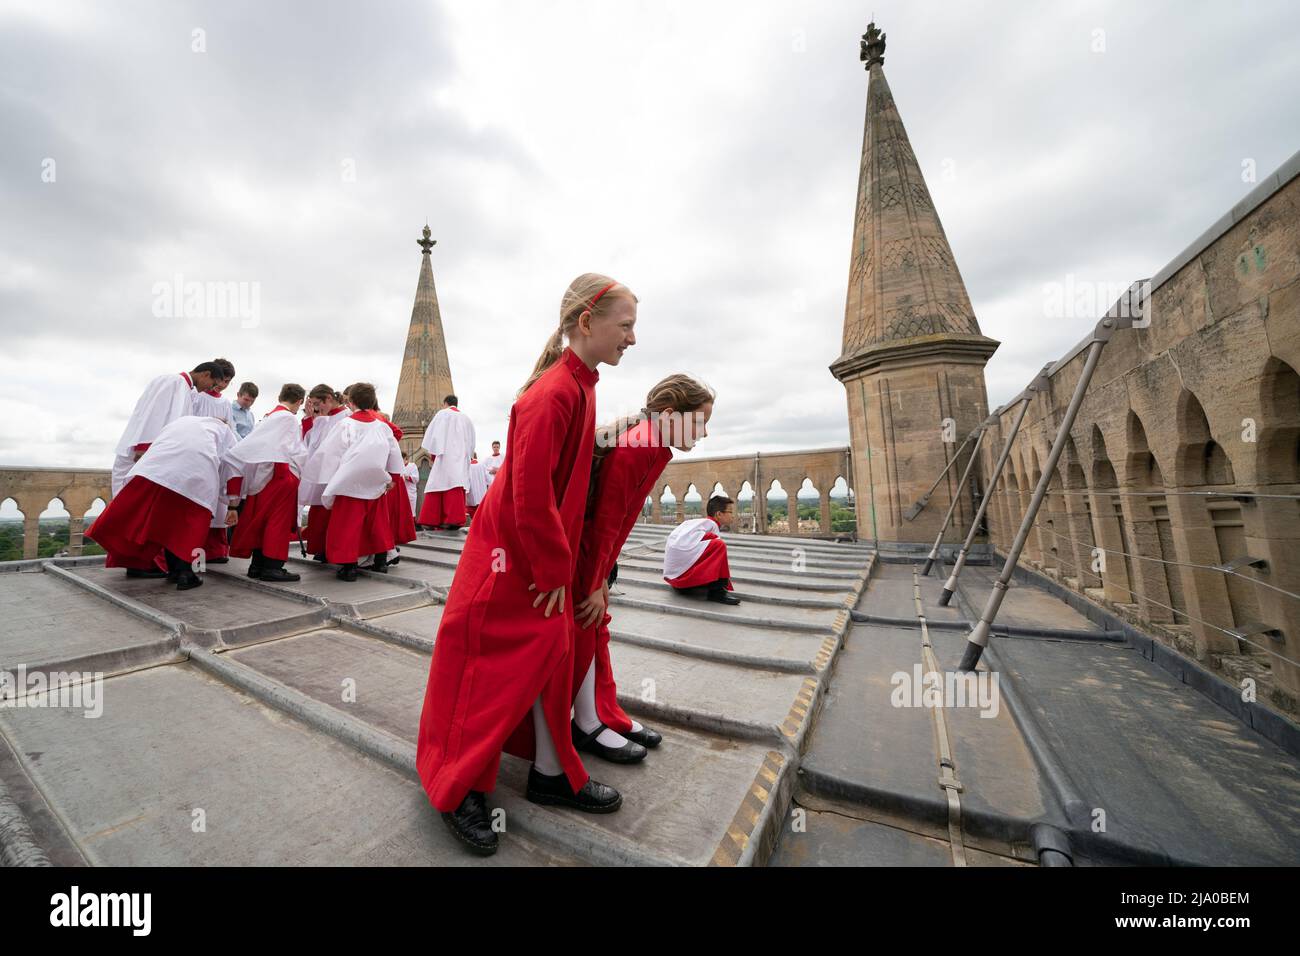 Choristers from the Choir of St John's College, Cambridge, take in the view before performing the Ascension Day carol from the top of the Chapel Tower at St John's College, a custom dating back to 1902. Picture date: Thursday May 26, 2022. Every year on Ascension Day the Choir ascends the 163ft Chapel Tower and sings the Ascension Day carol. This custom dates from 1902 and was begun by the then Director of Music, Cyril Rootham, following a conversation with Sir Joseph Larmor. Sir Jospeh was insistent that a choir singing from the tower would not be heard from the ground. Rootham was keen to pr Stock Photo